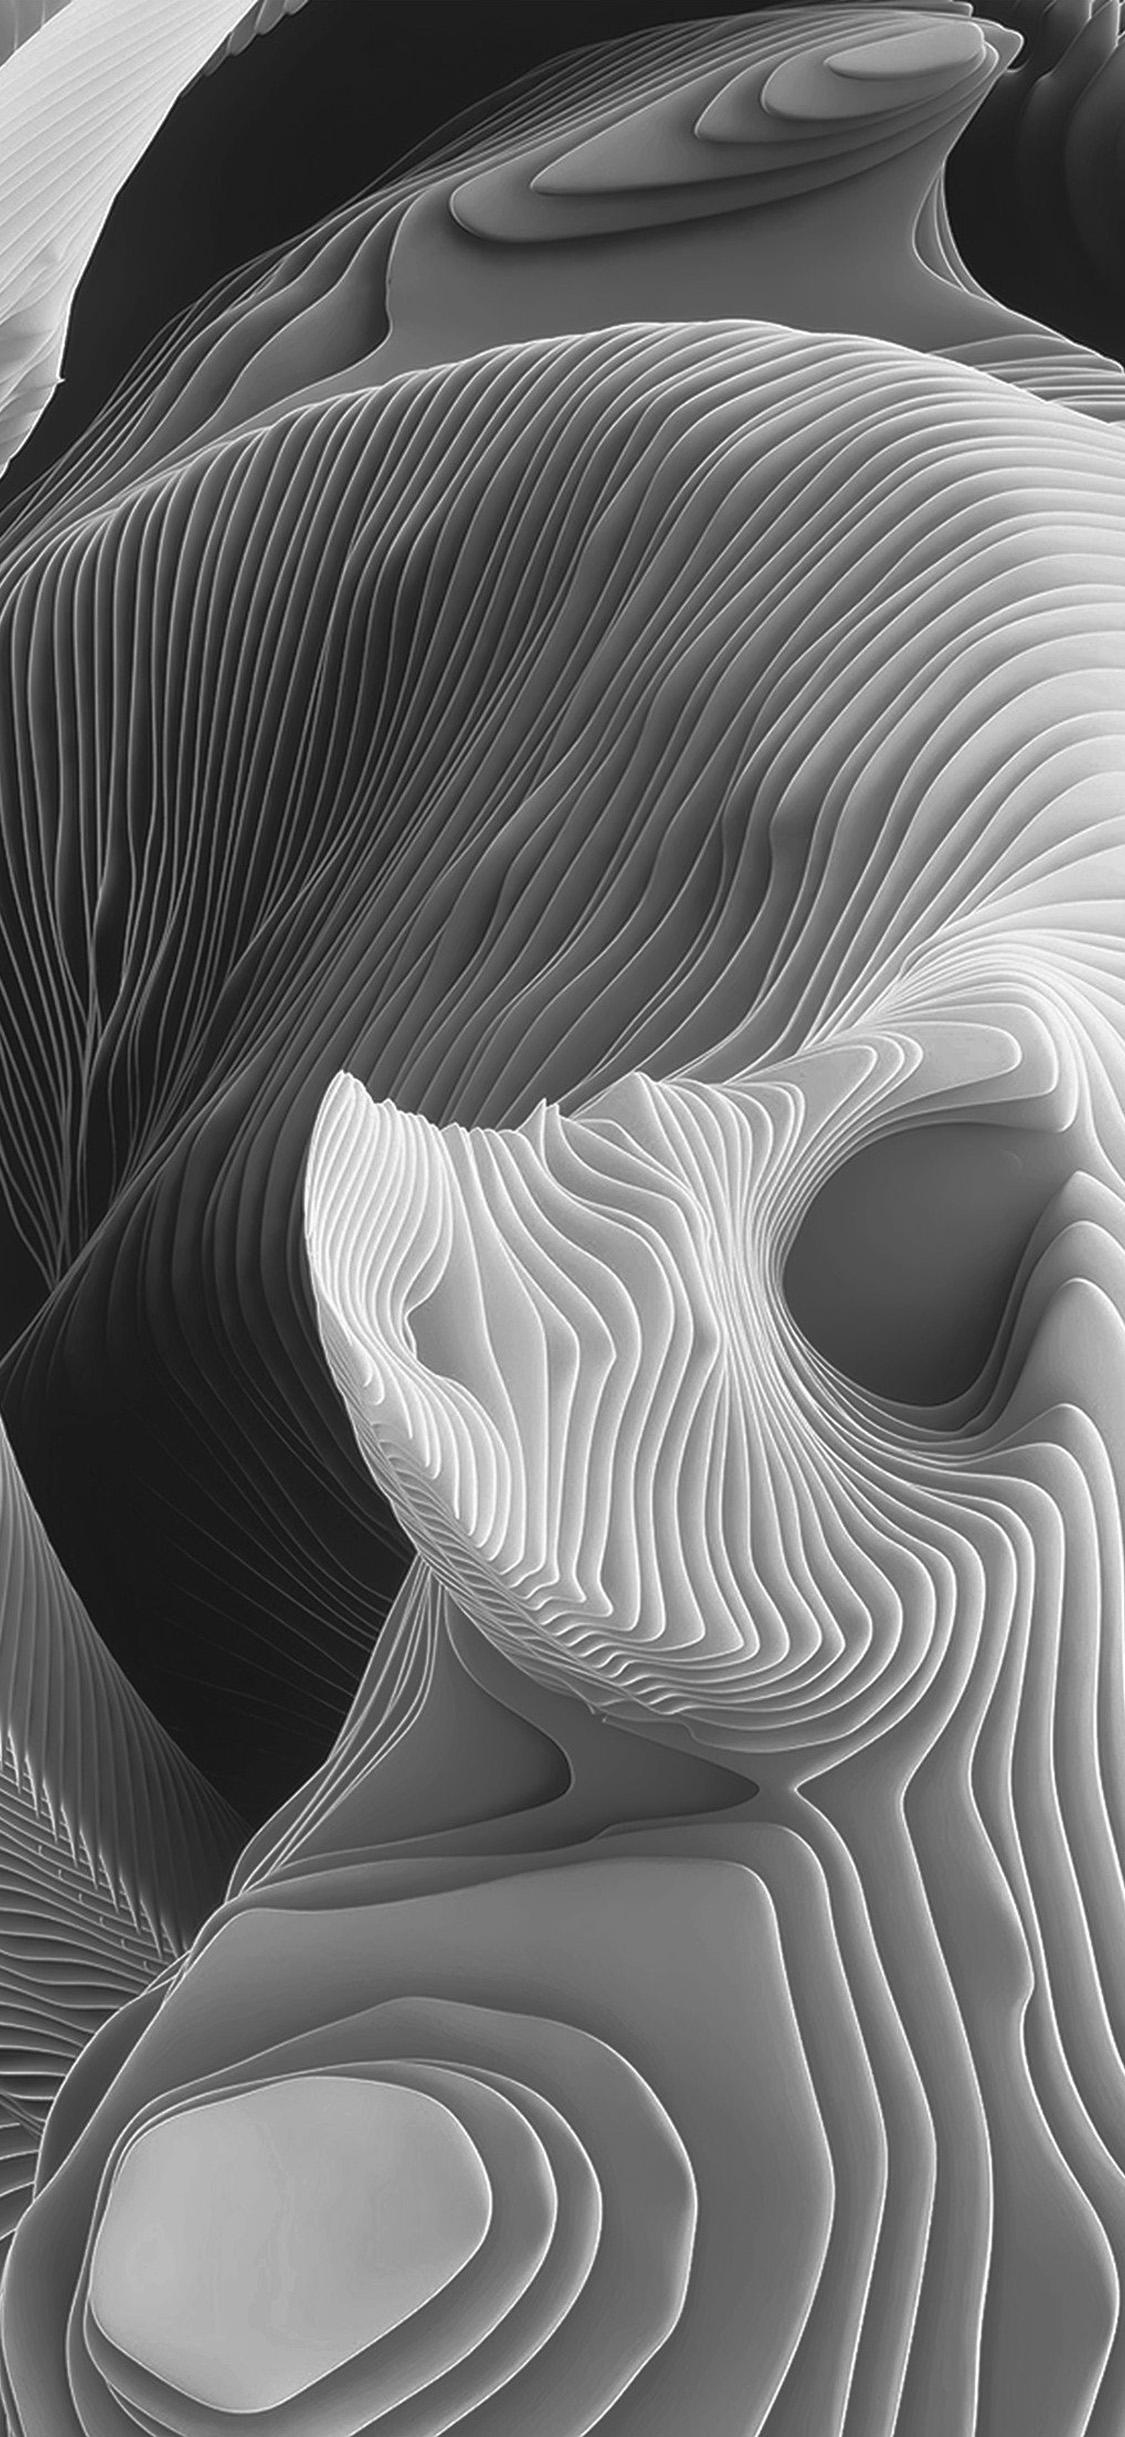 Curves Layer Bw Dark Abstract IPhone X2 Wallpaper Download